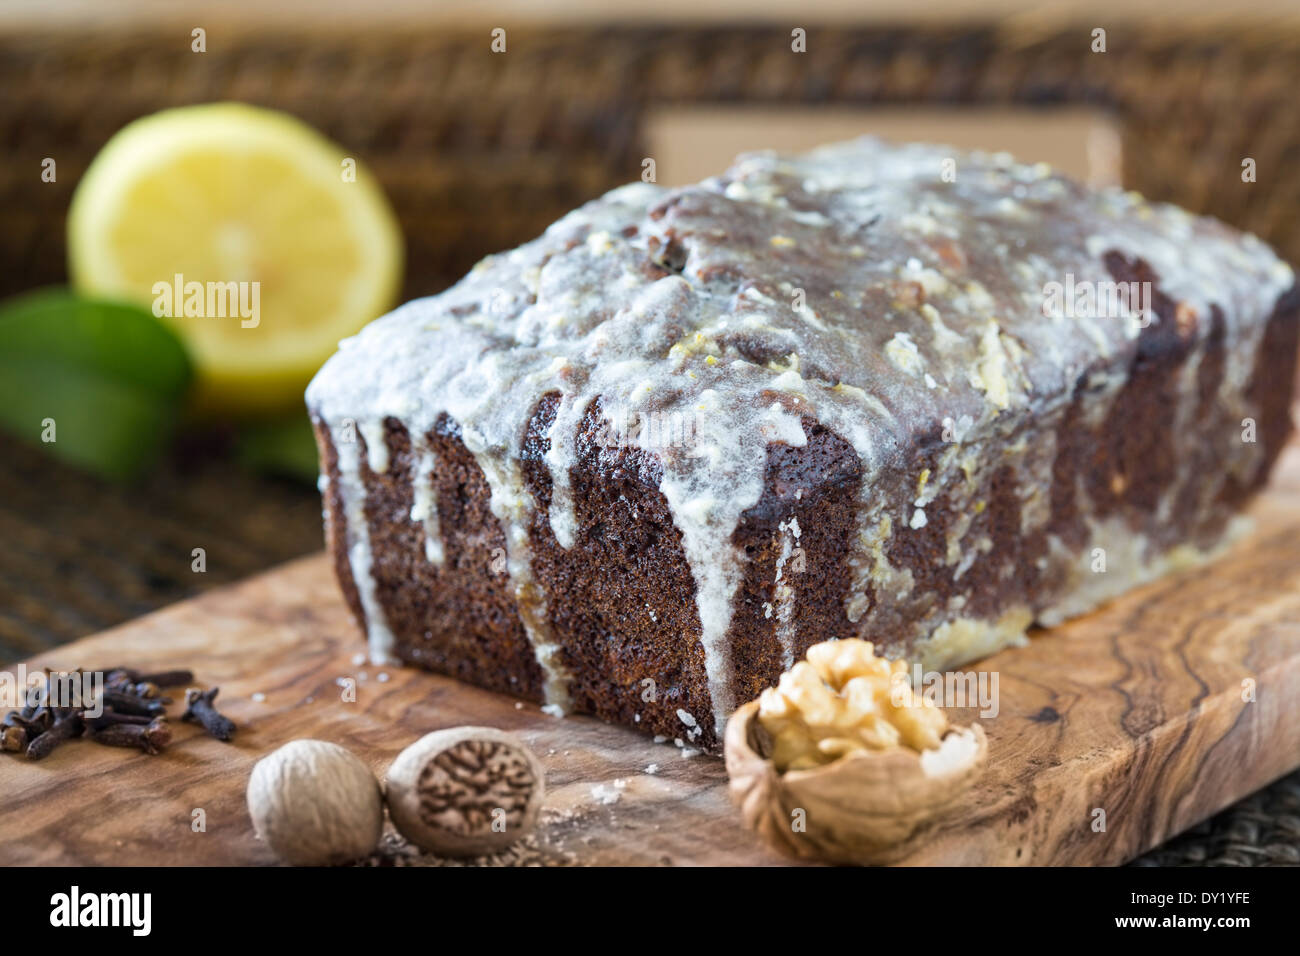 Whole iced homemade date and walnut cake on wooden board and woven tray. Stock Photo